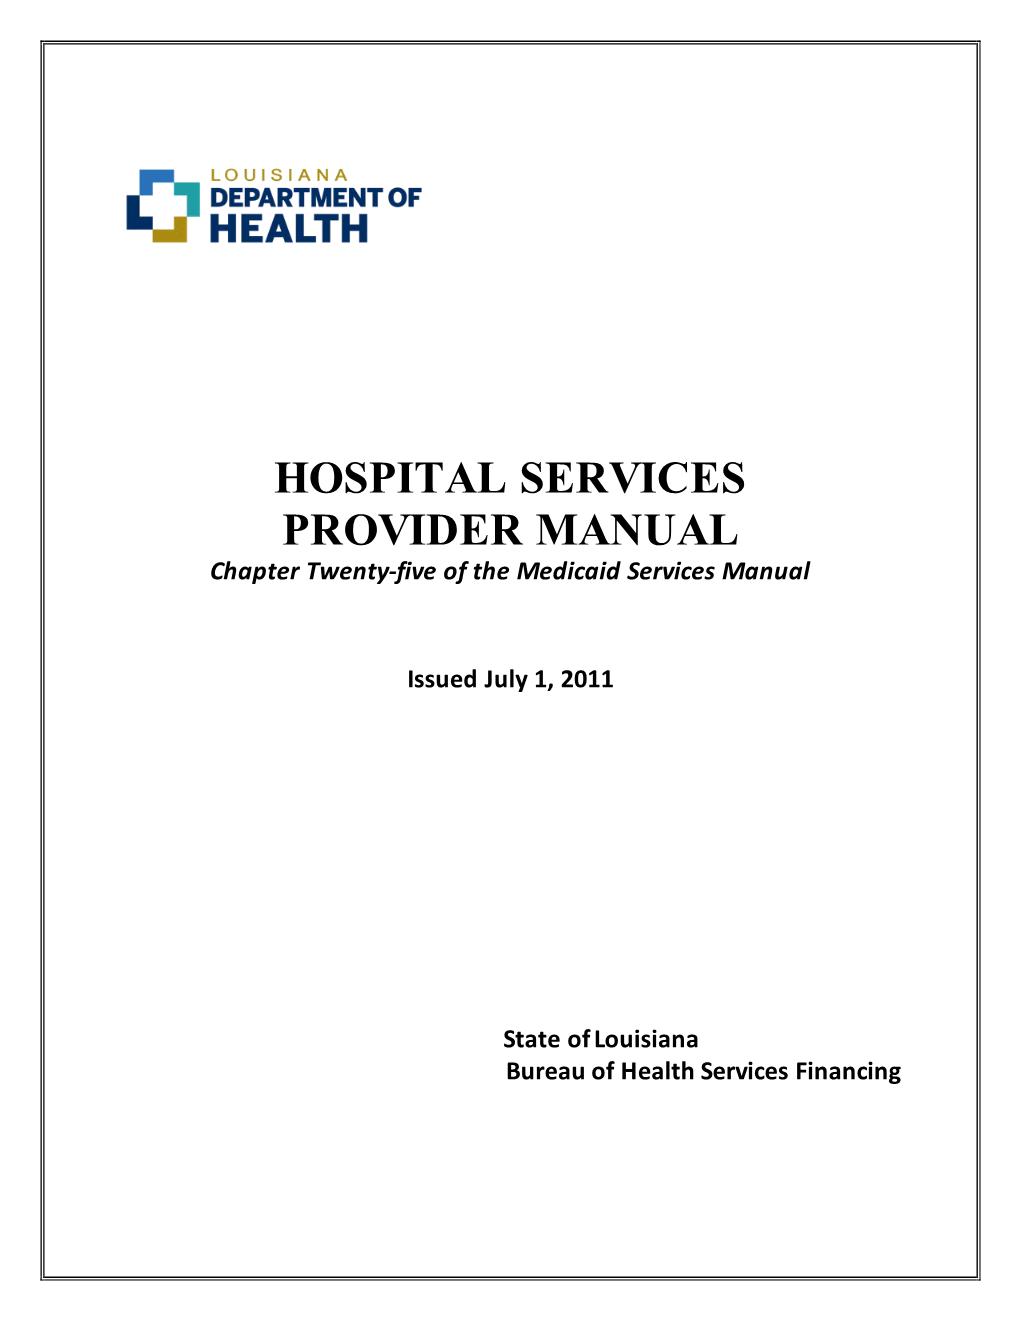 HOSPITAL SERVICES PROVIDER MANUAL Chapter Twenty-Five of the Medicaid Services Manual